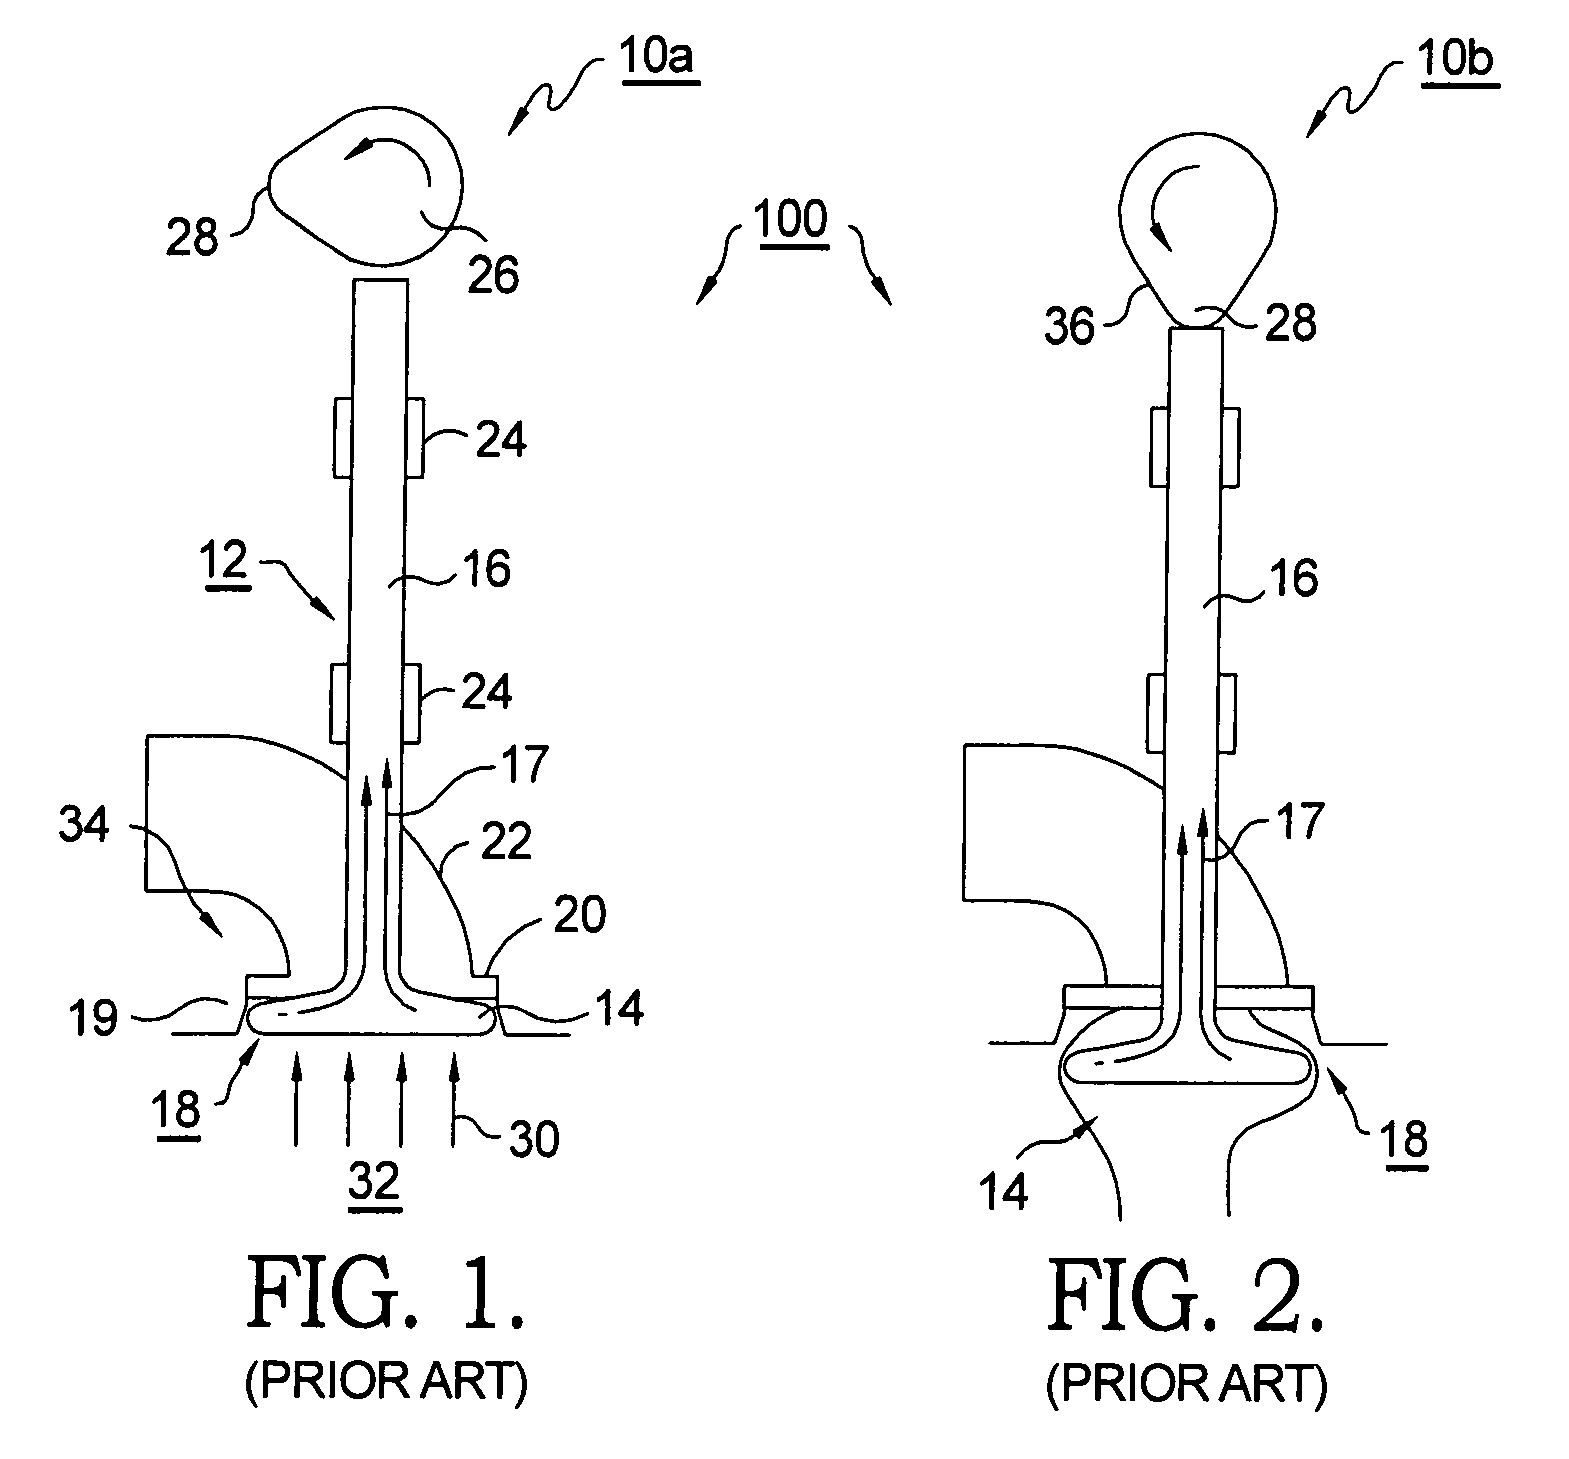 Outward-opening gas-exchange valve system for an internal combustion engine